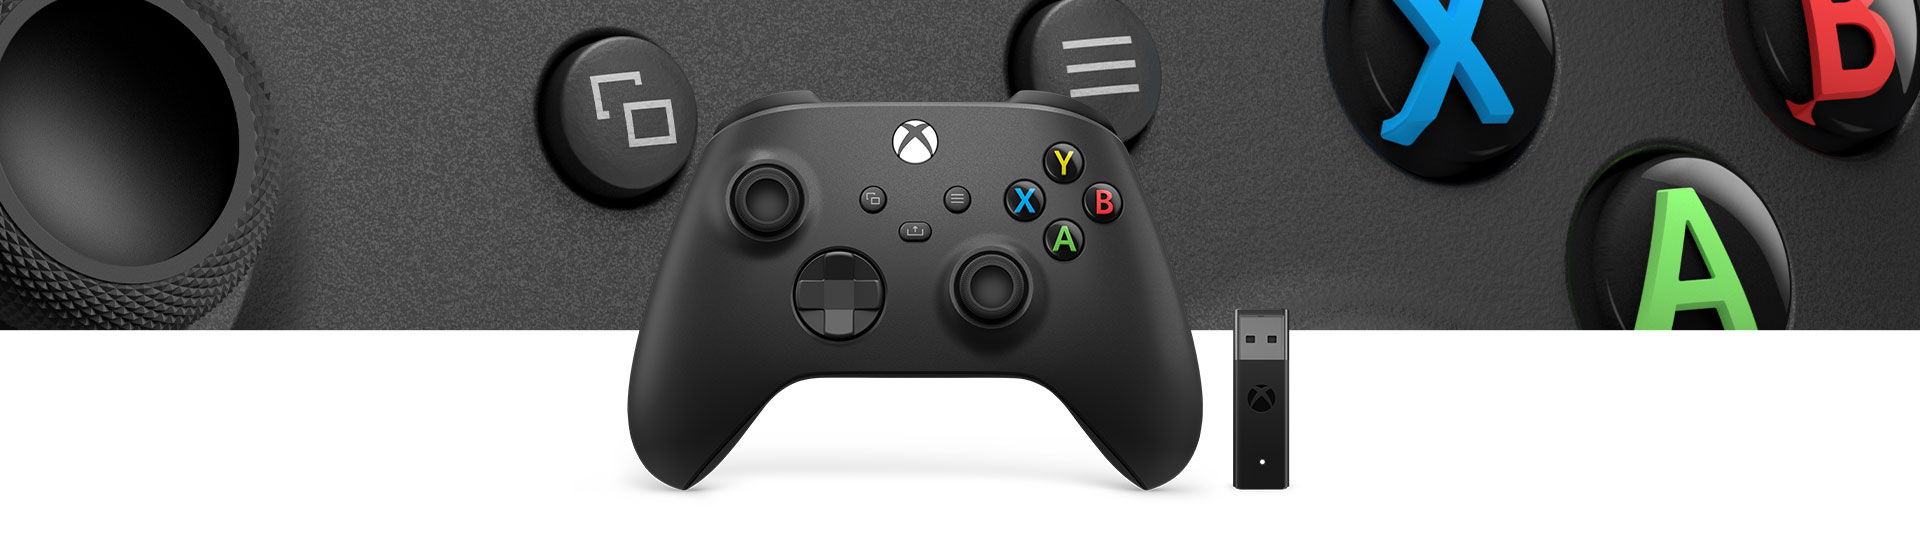 Xbox Wireless Controller + Wireless Adapter for Windows 10  with a closeup of controller surface texture